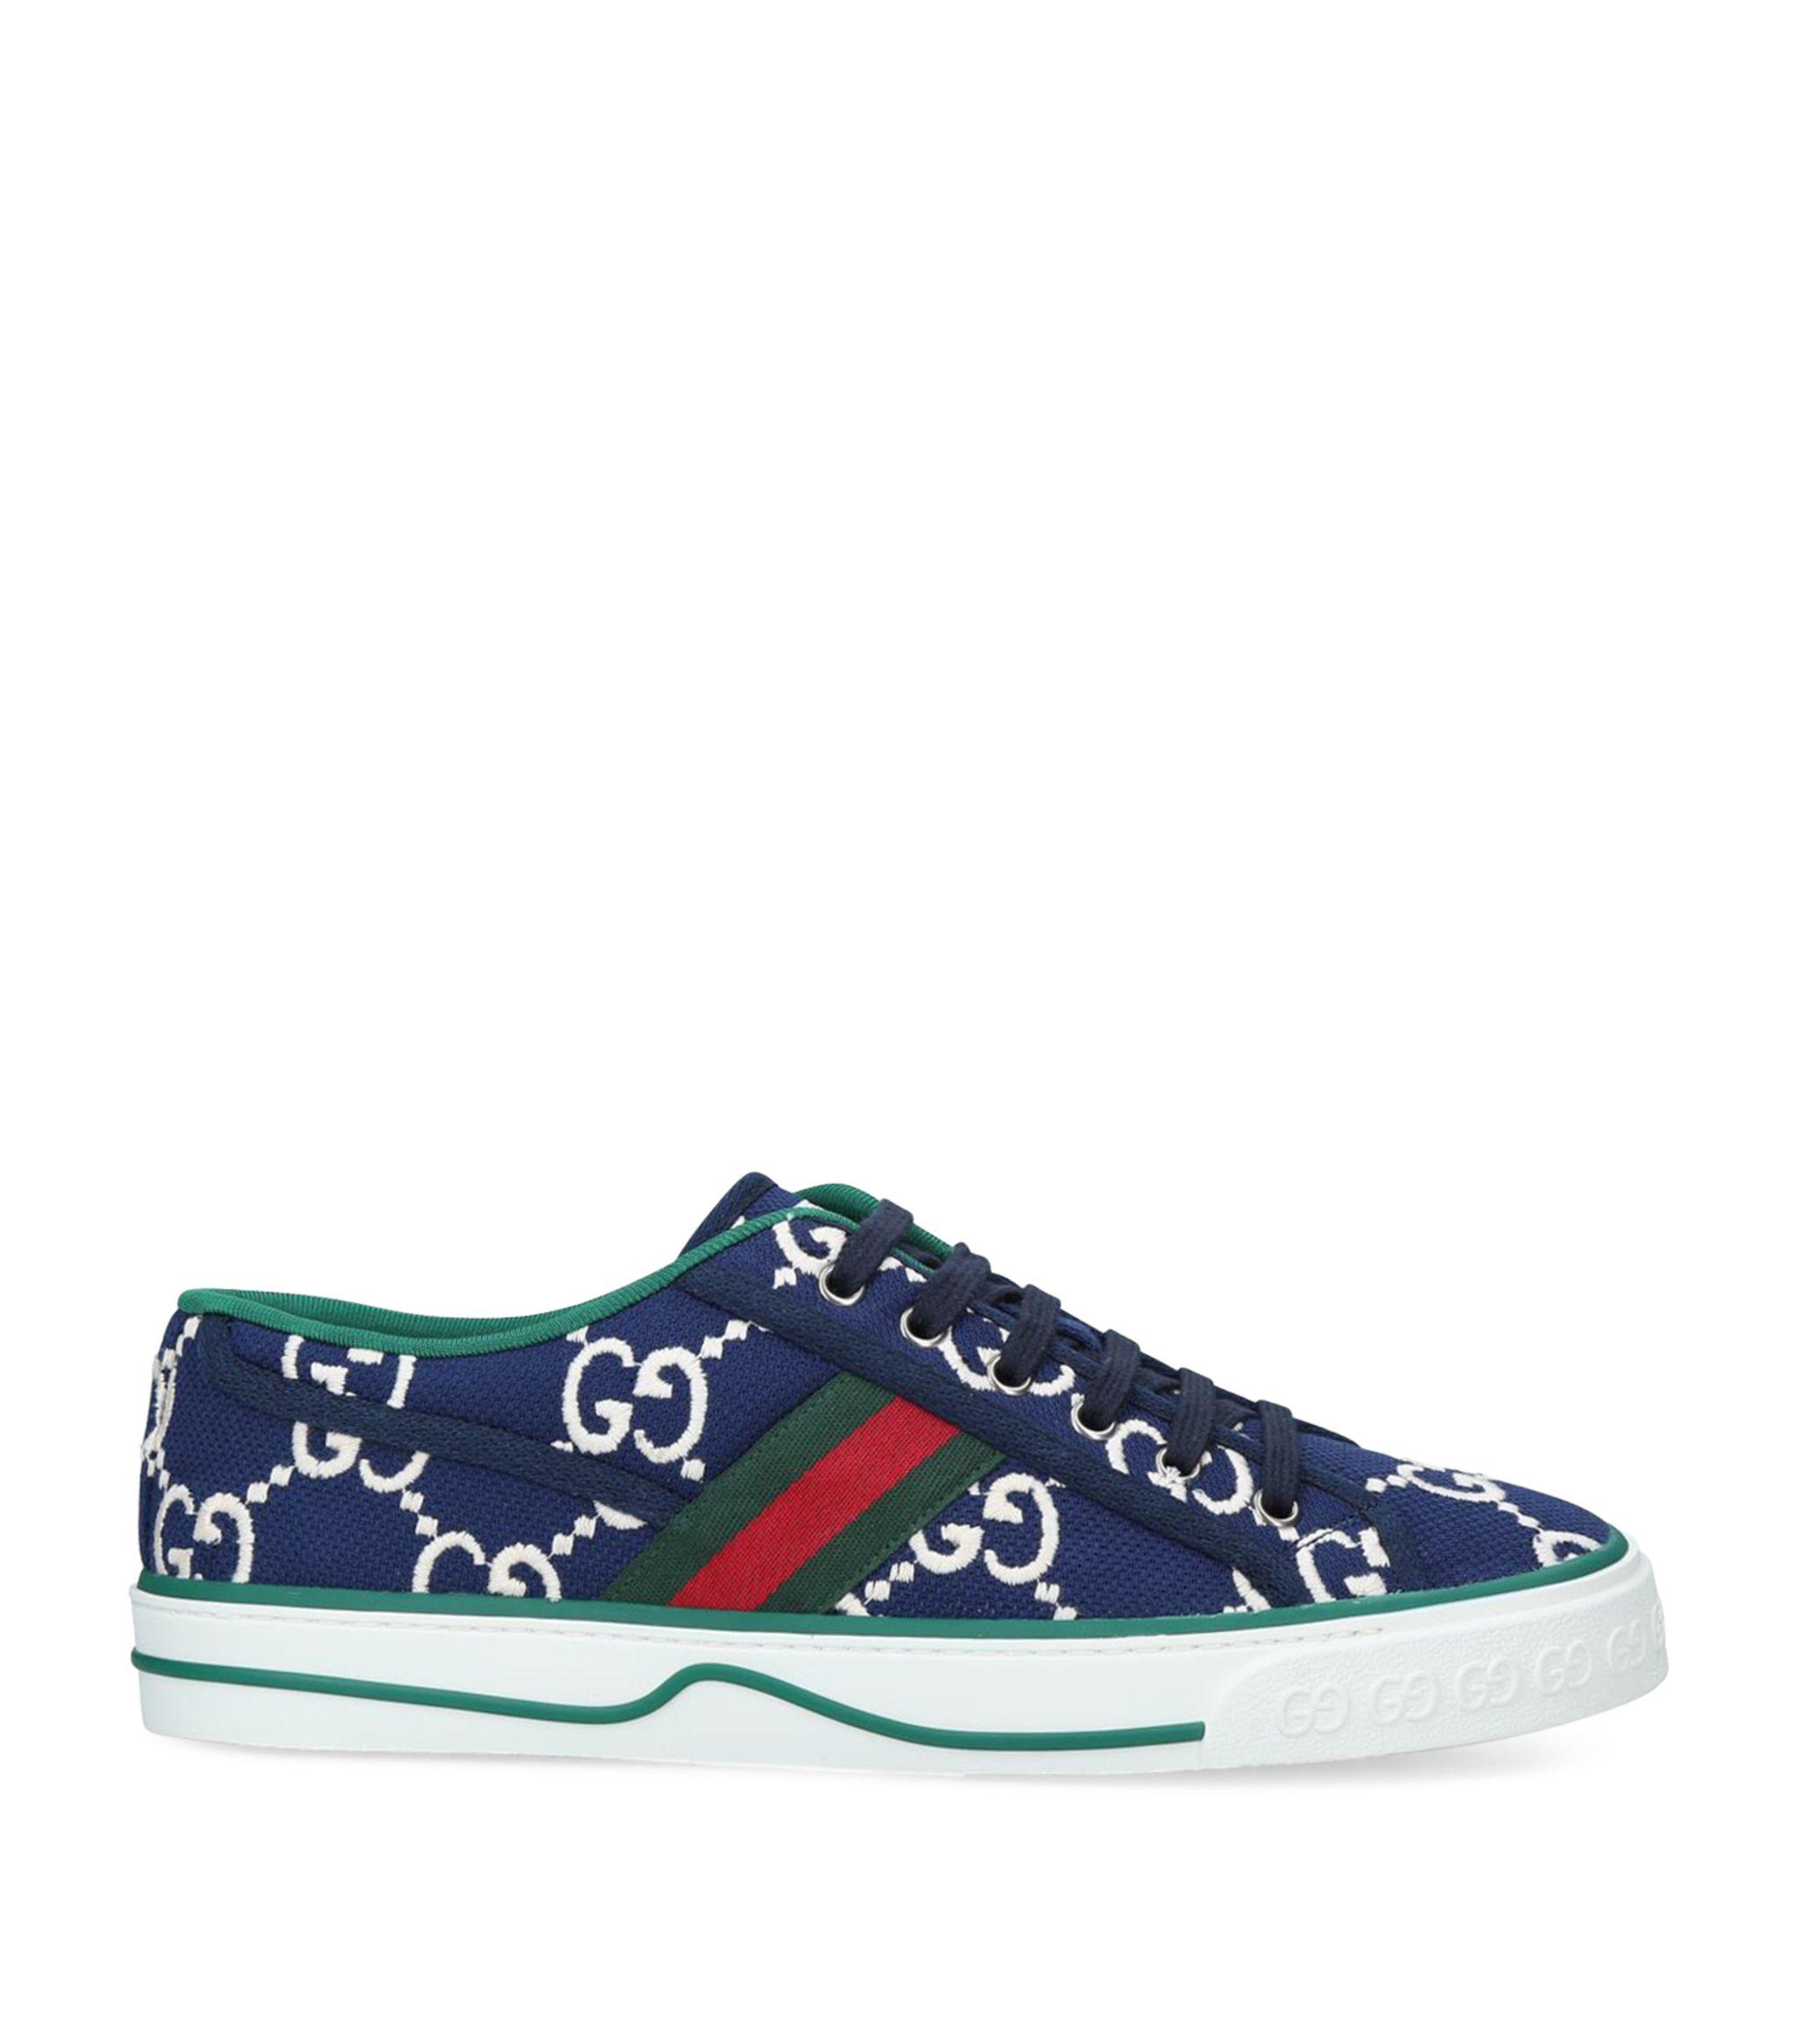 Gucci Canvas Low Trainers in Blue & White (Blue) for Men - Save 32% - Lyst